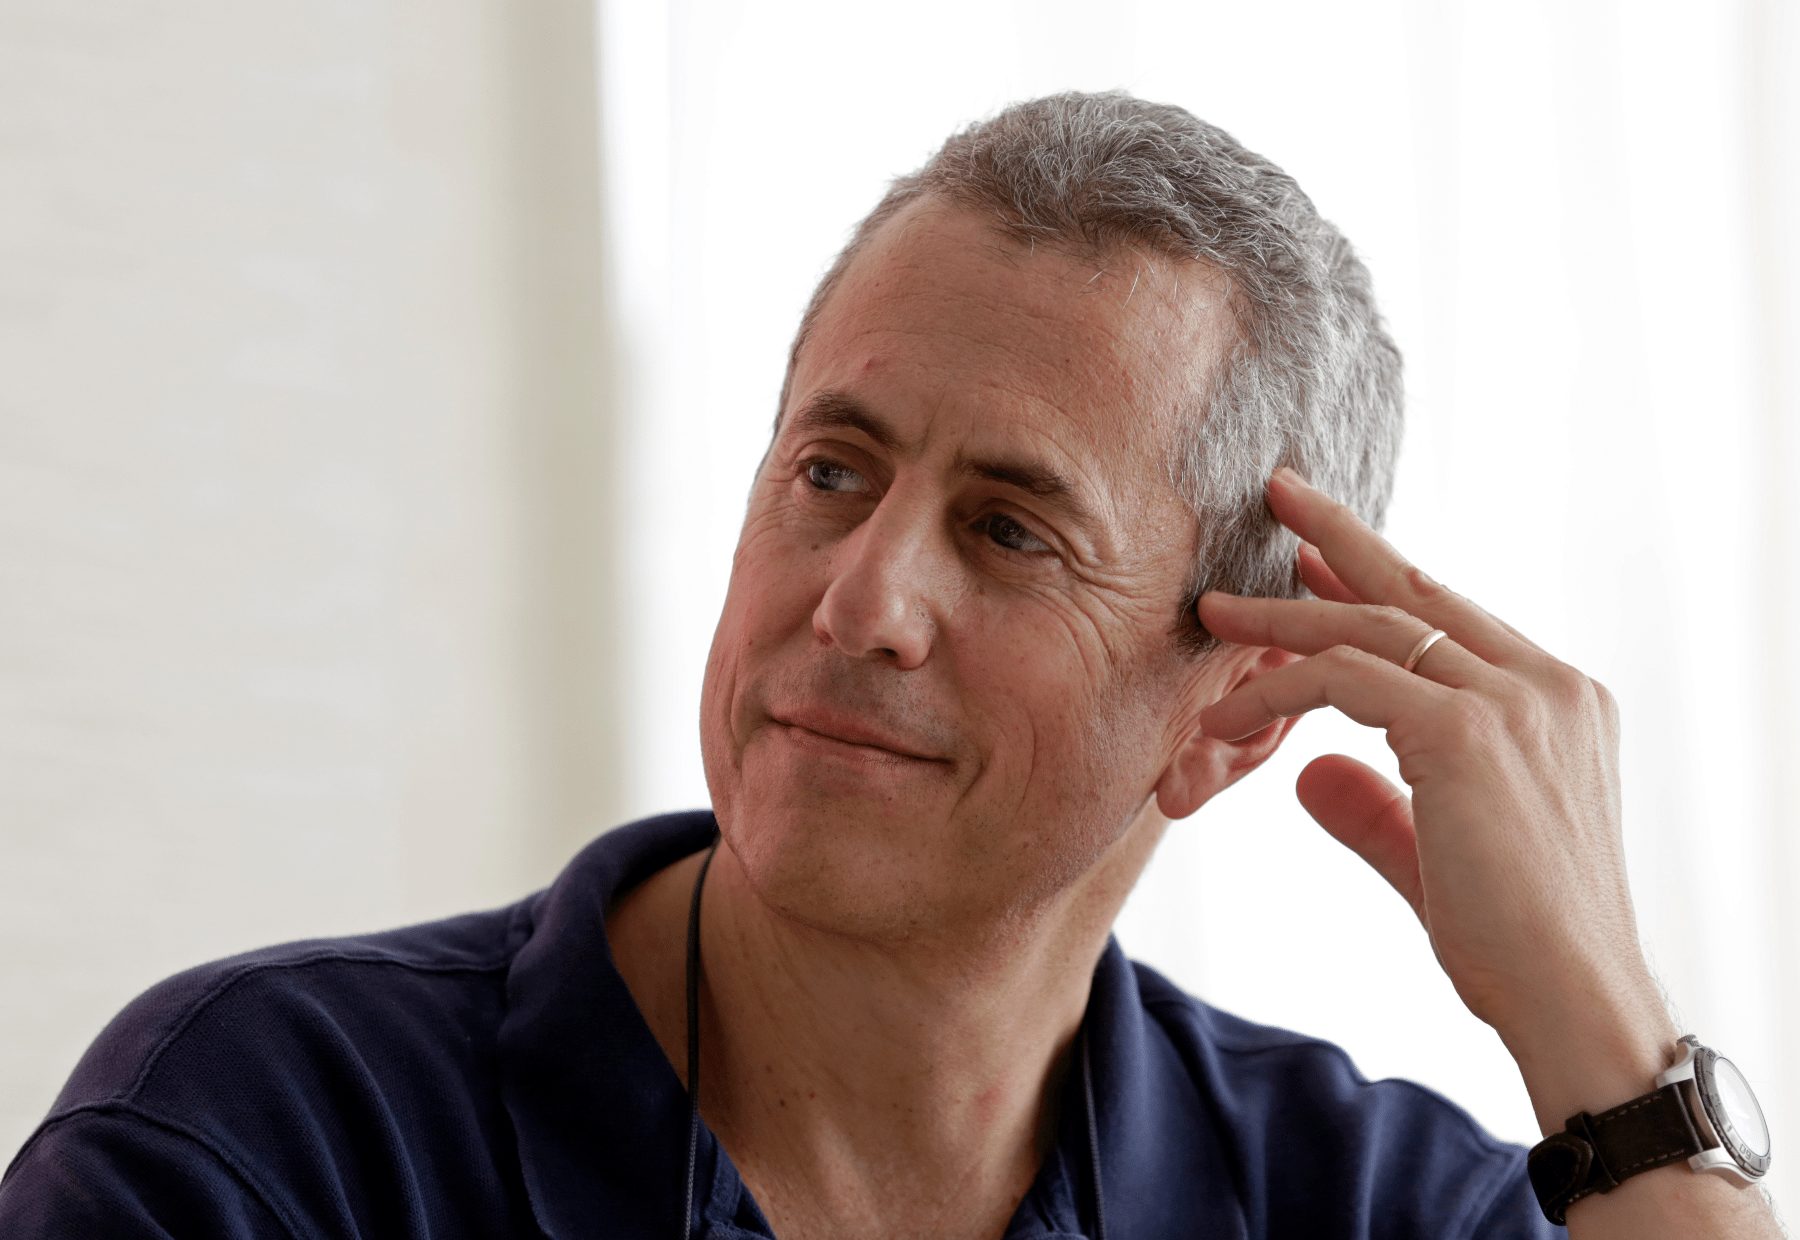 Accomplished restaurateur Danny Meyer says that the real competition in restaurants is for people's time. - Alan Diaz / Associated Press